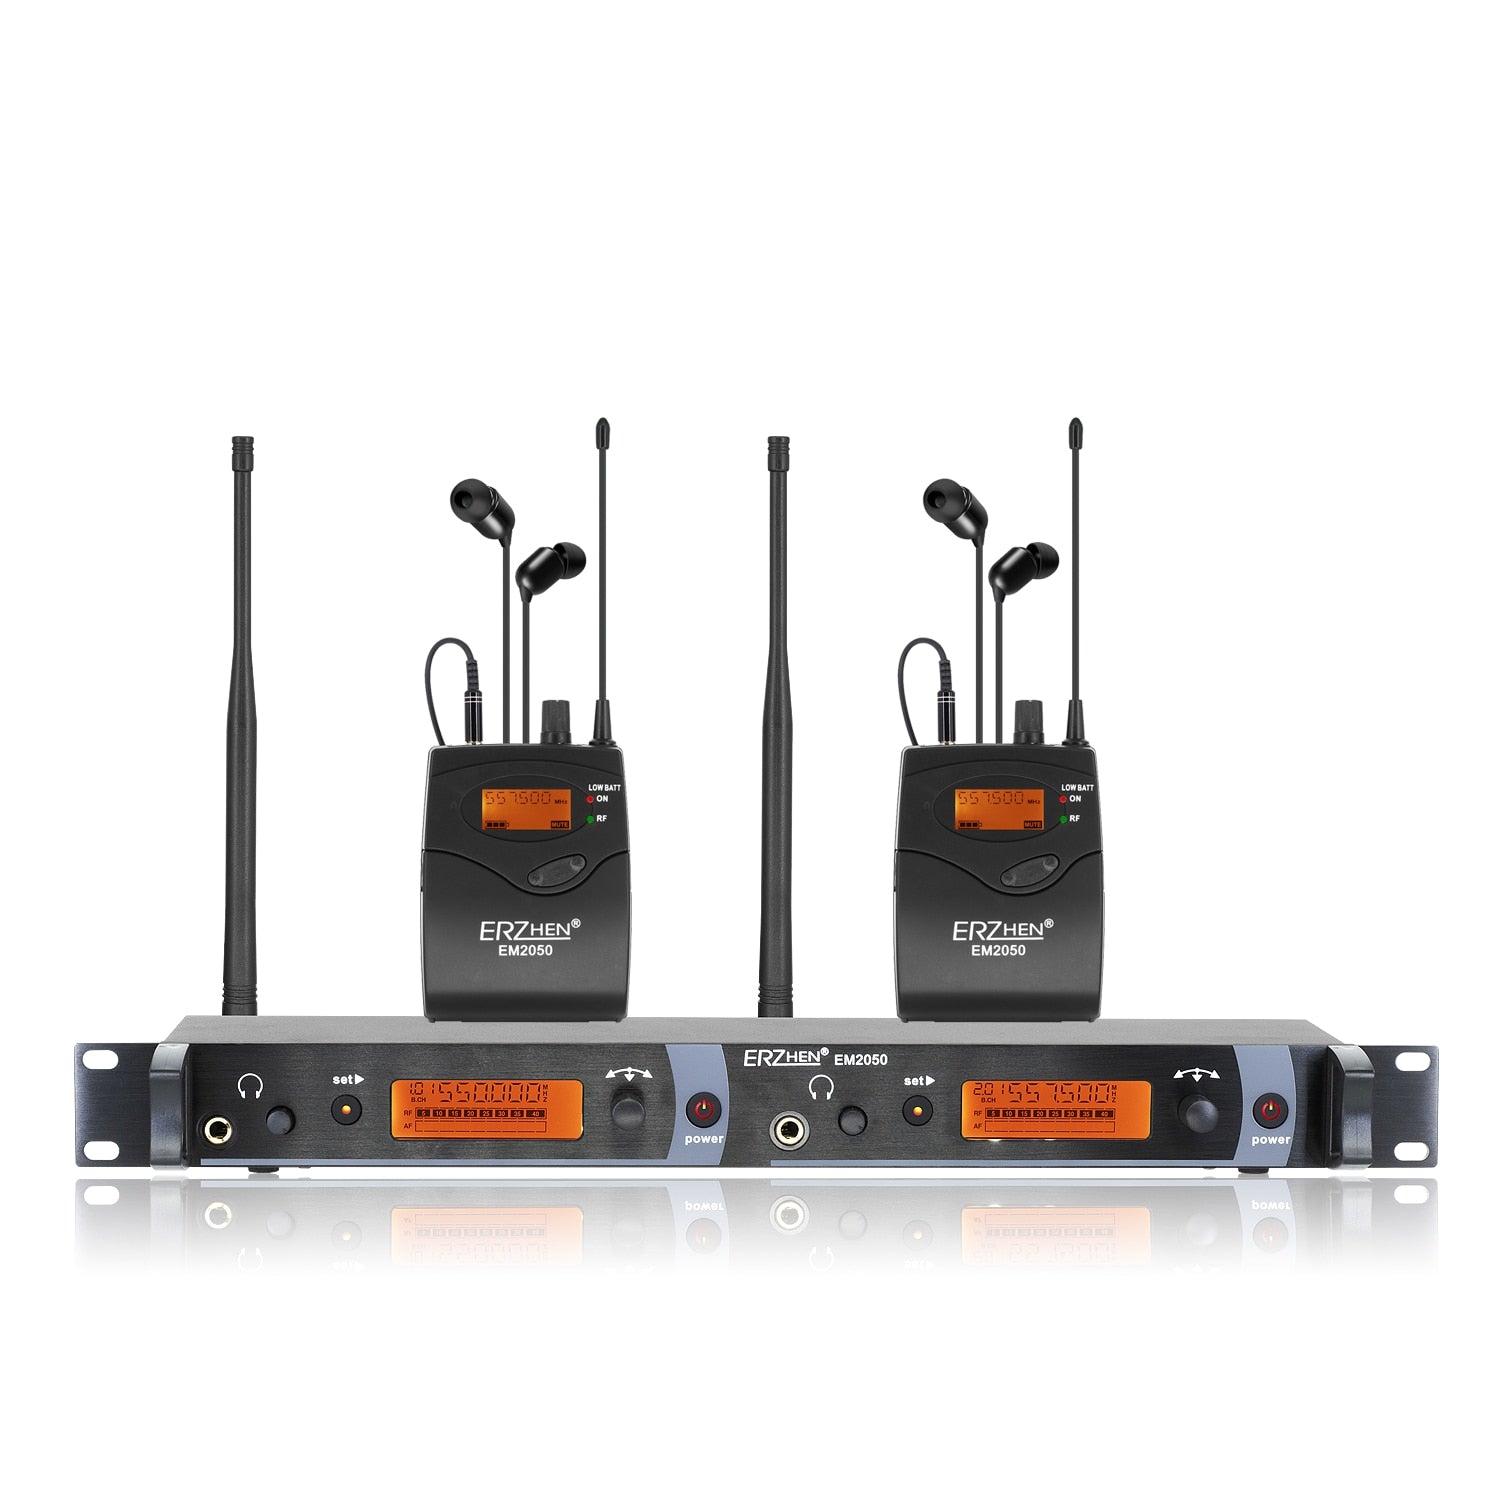 ERZHEN Wireless Monitor System in Ear Multi Transmitter Professional for Stage Performances EM2050